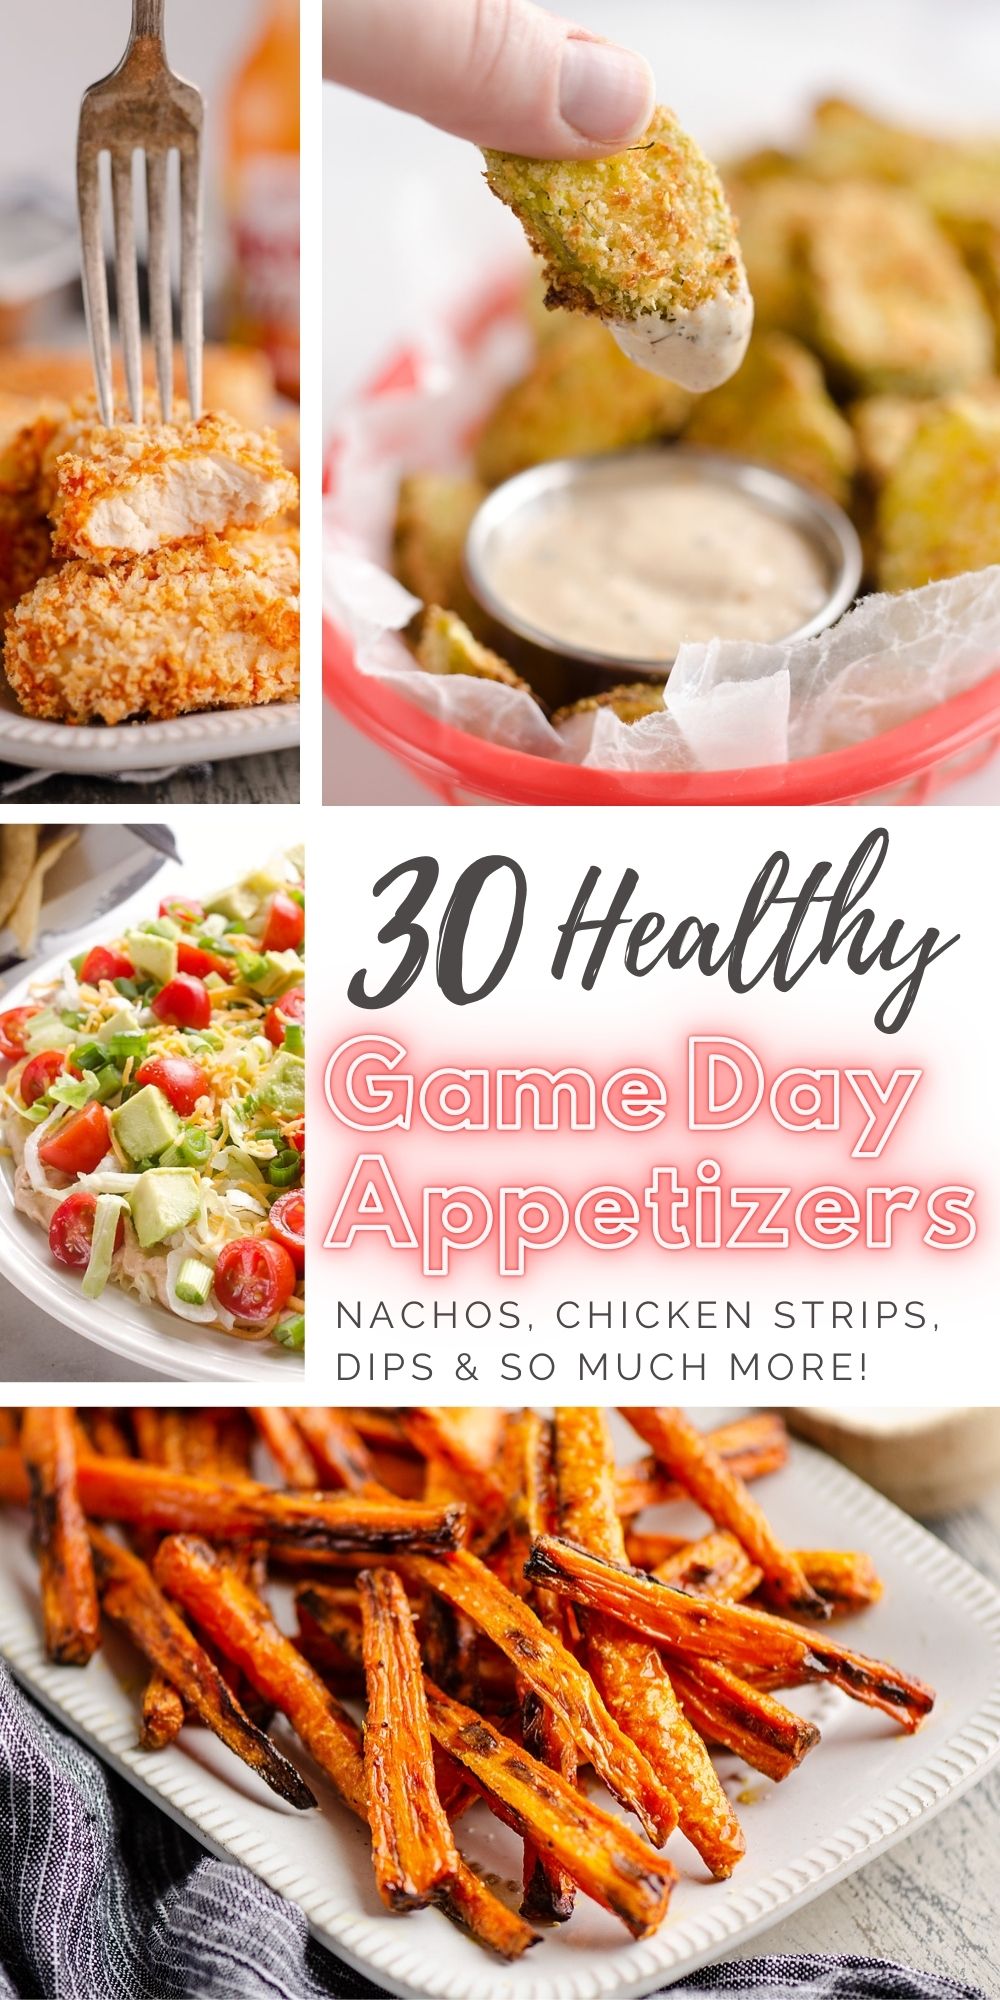 30 Healthy Game Day Finger Foods